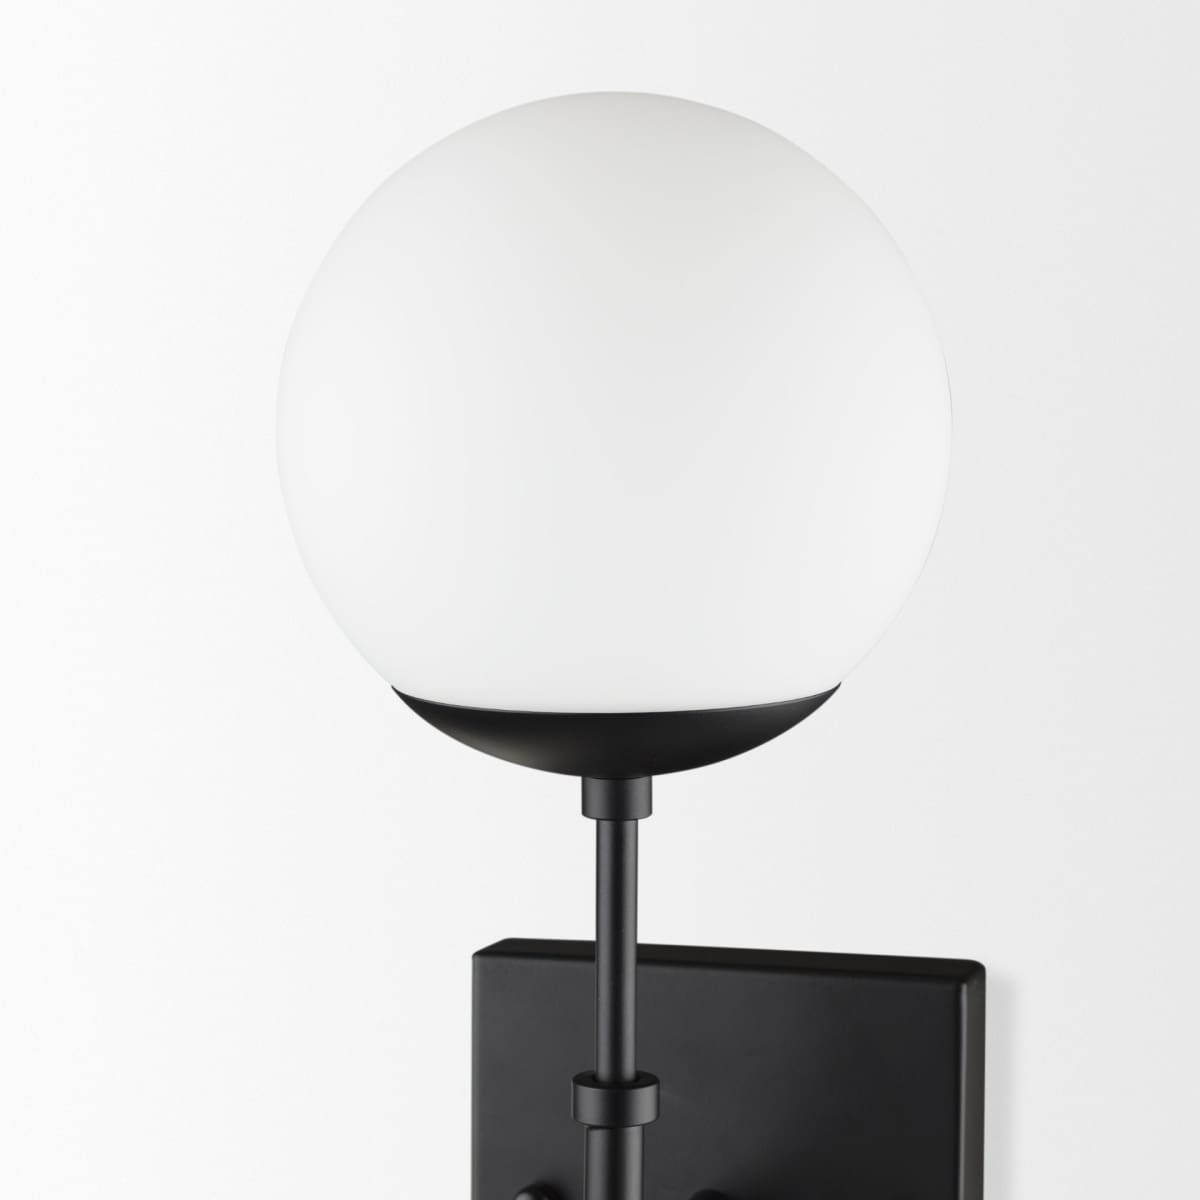 Edie Wall Sconce Matte Black - wall-fixtures